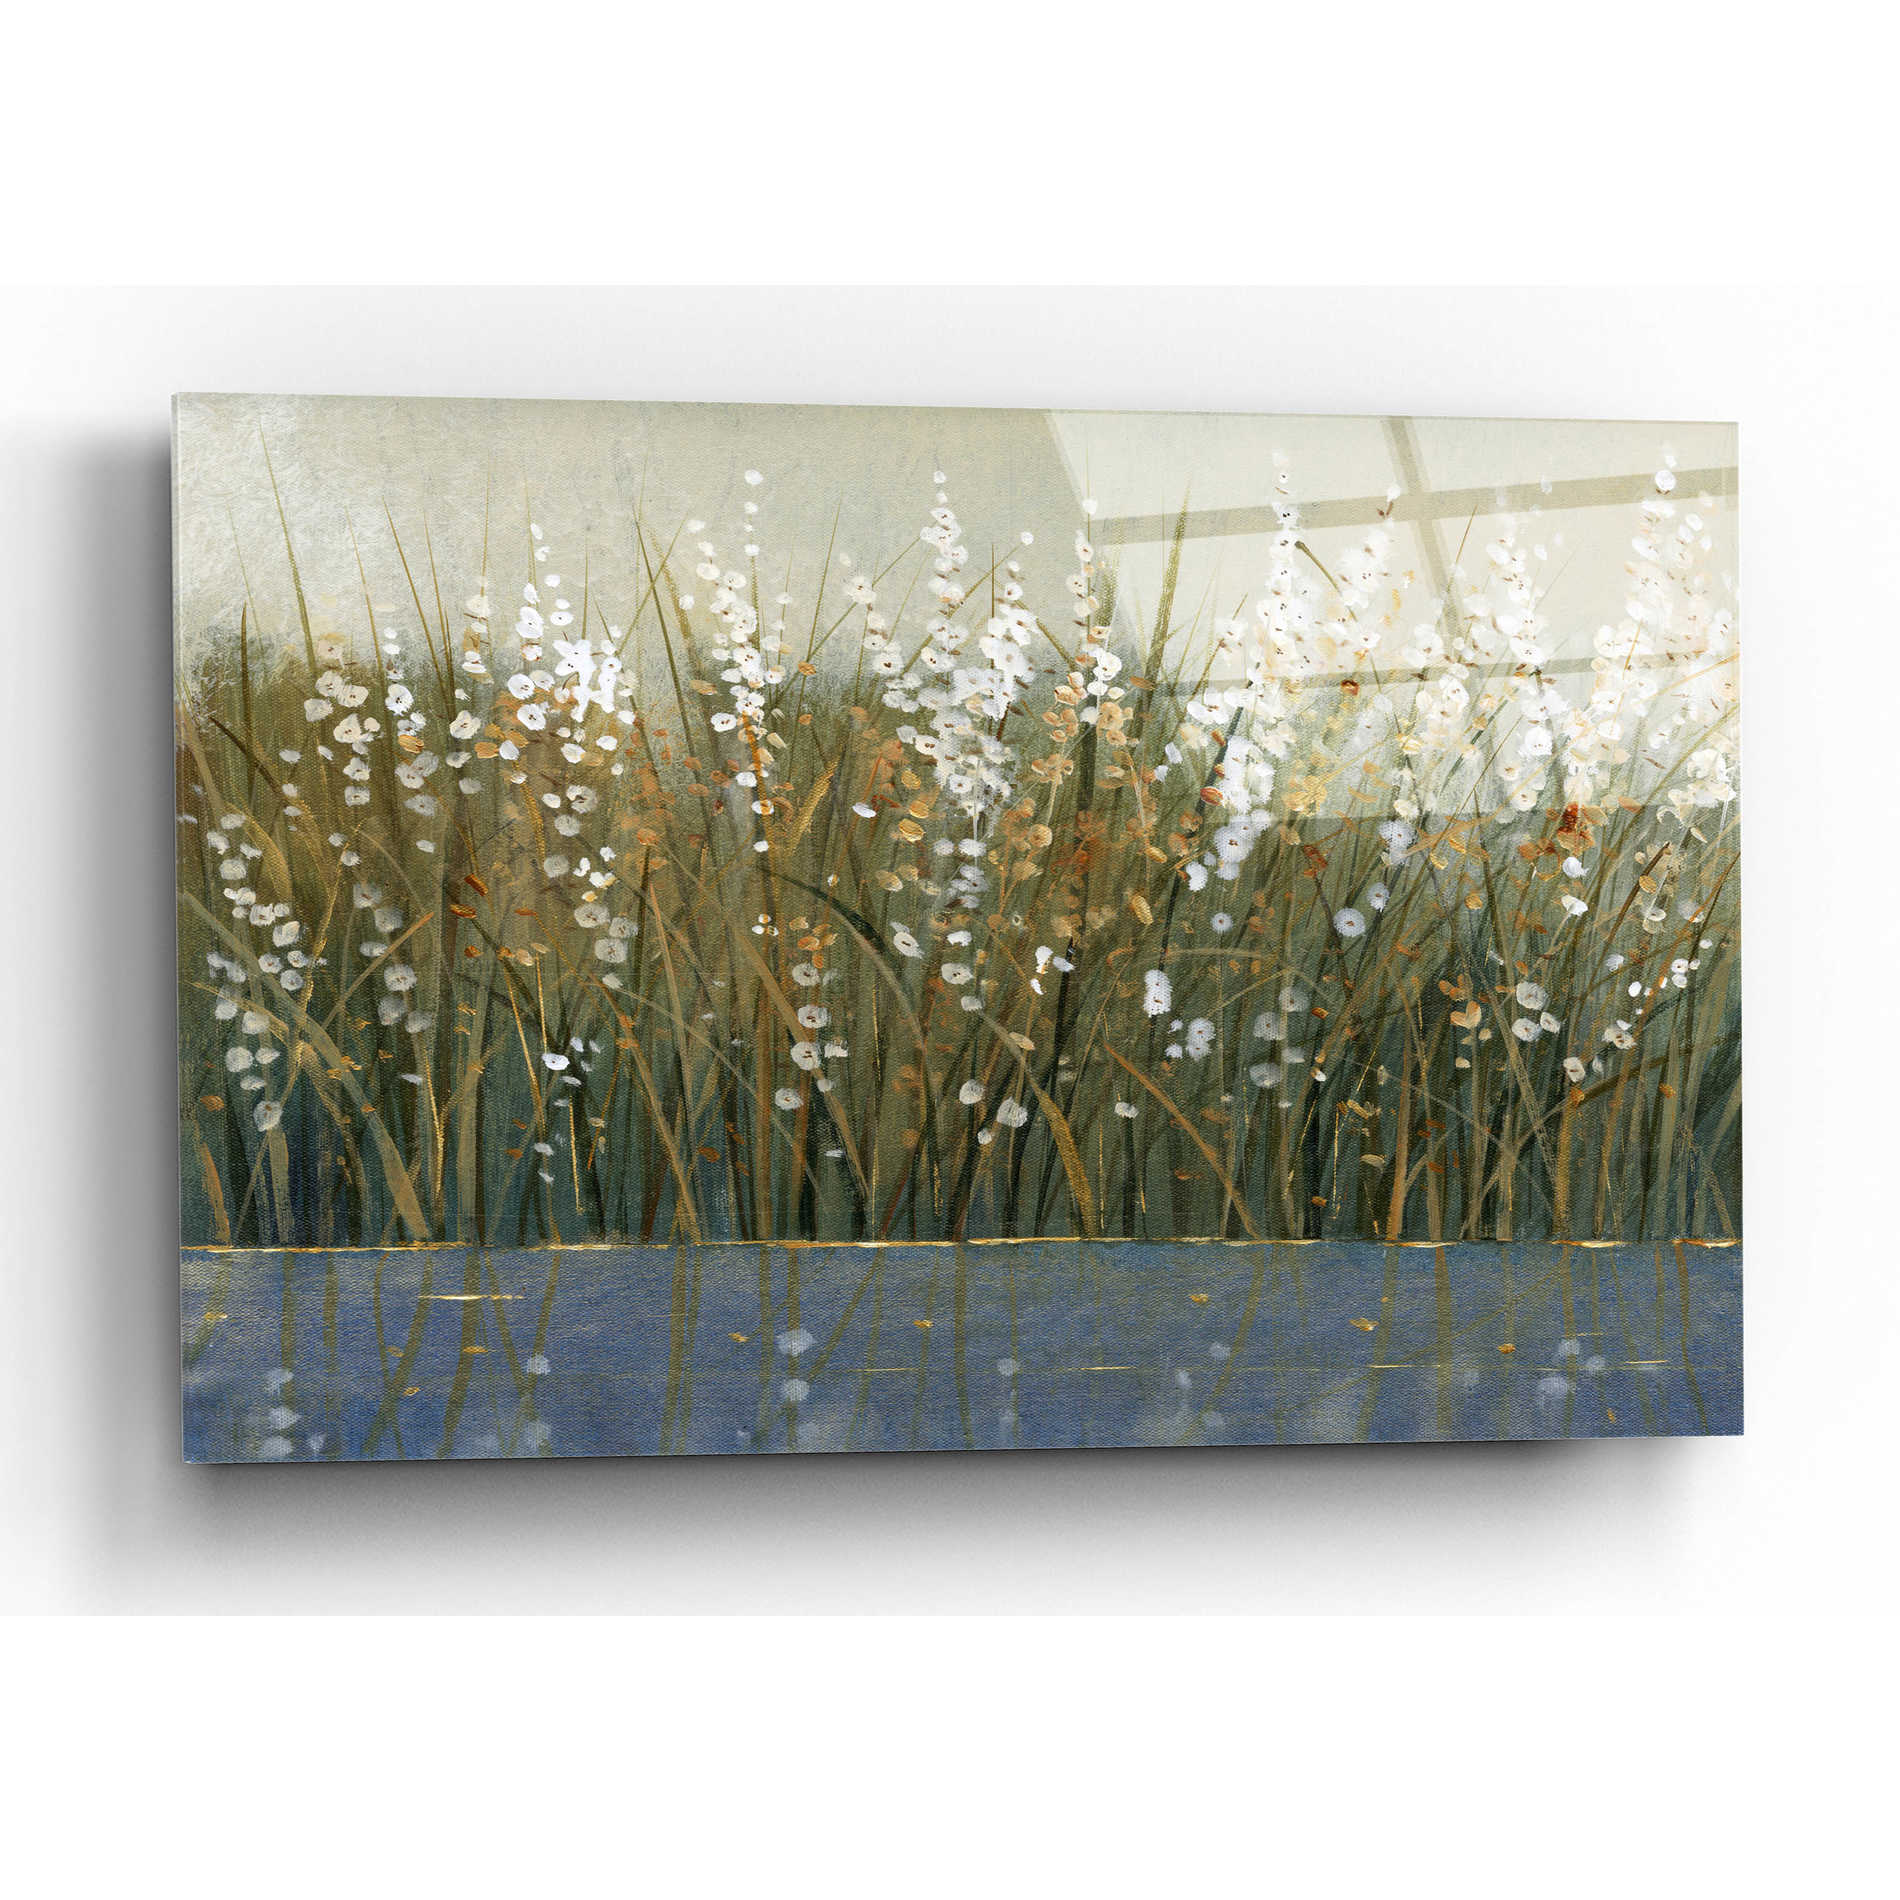 Epic Art 'By the Tall Grass II' by Tim O'Toole, Acrylic Glass Wall Art,24x16